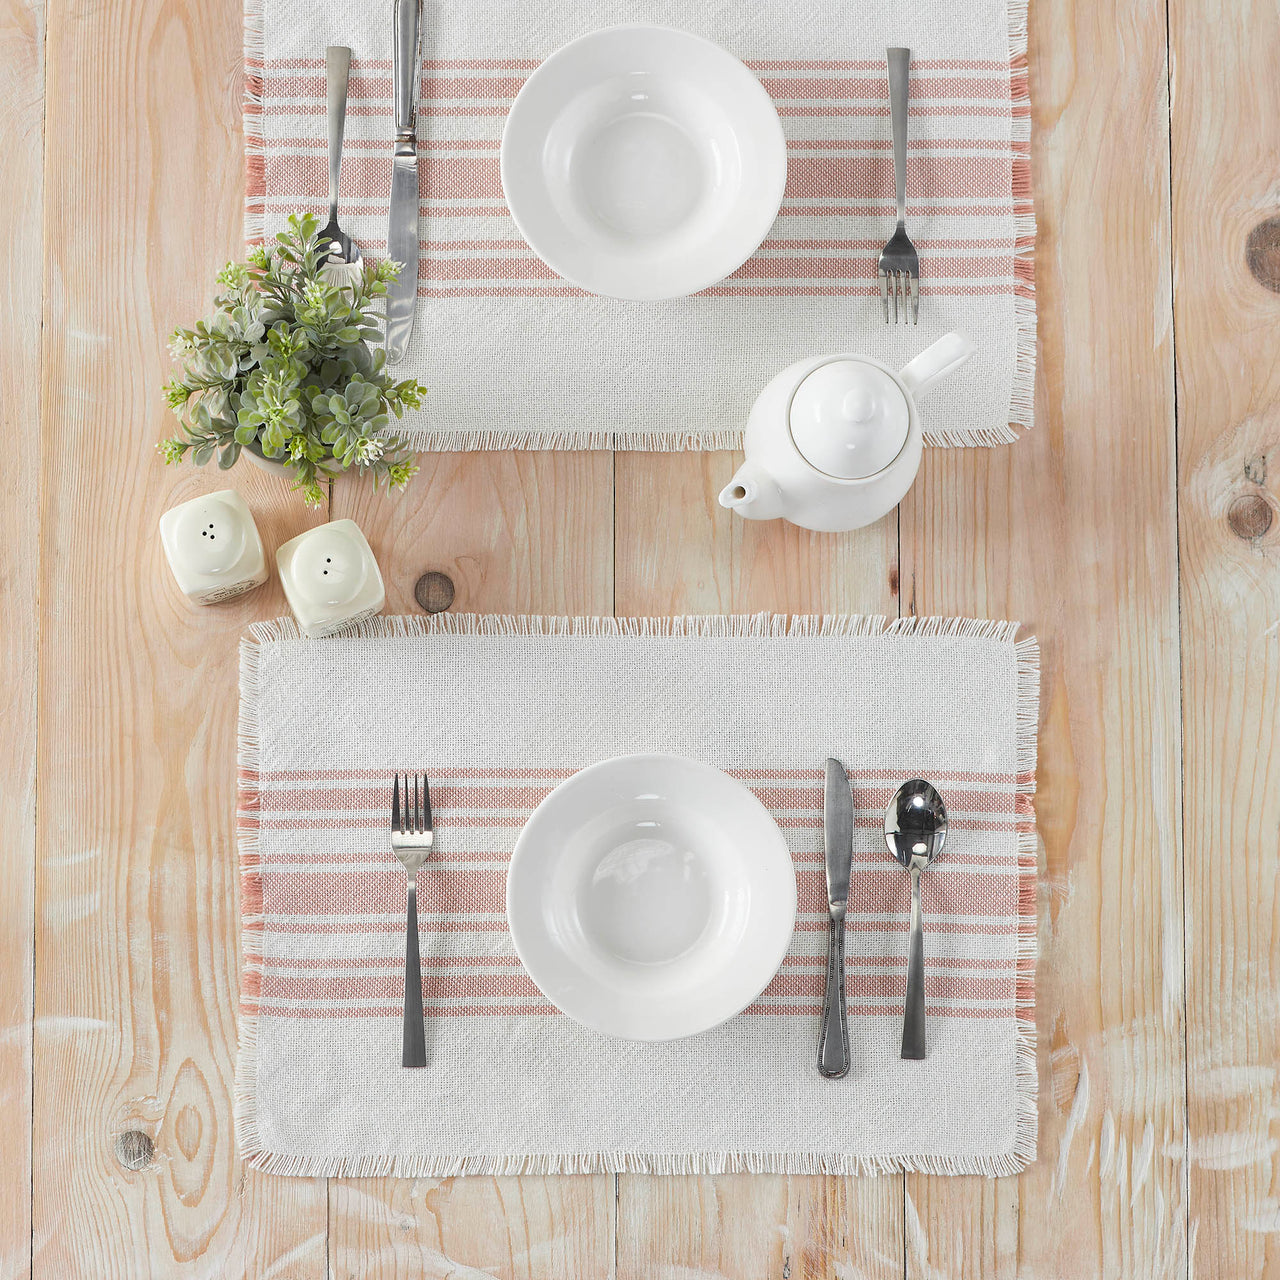 Antique White Stripe Coral Indoor/Outdoor Placemat Set of 6 13x19 VHC Brands